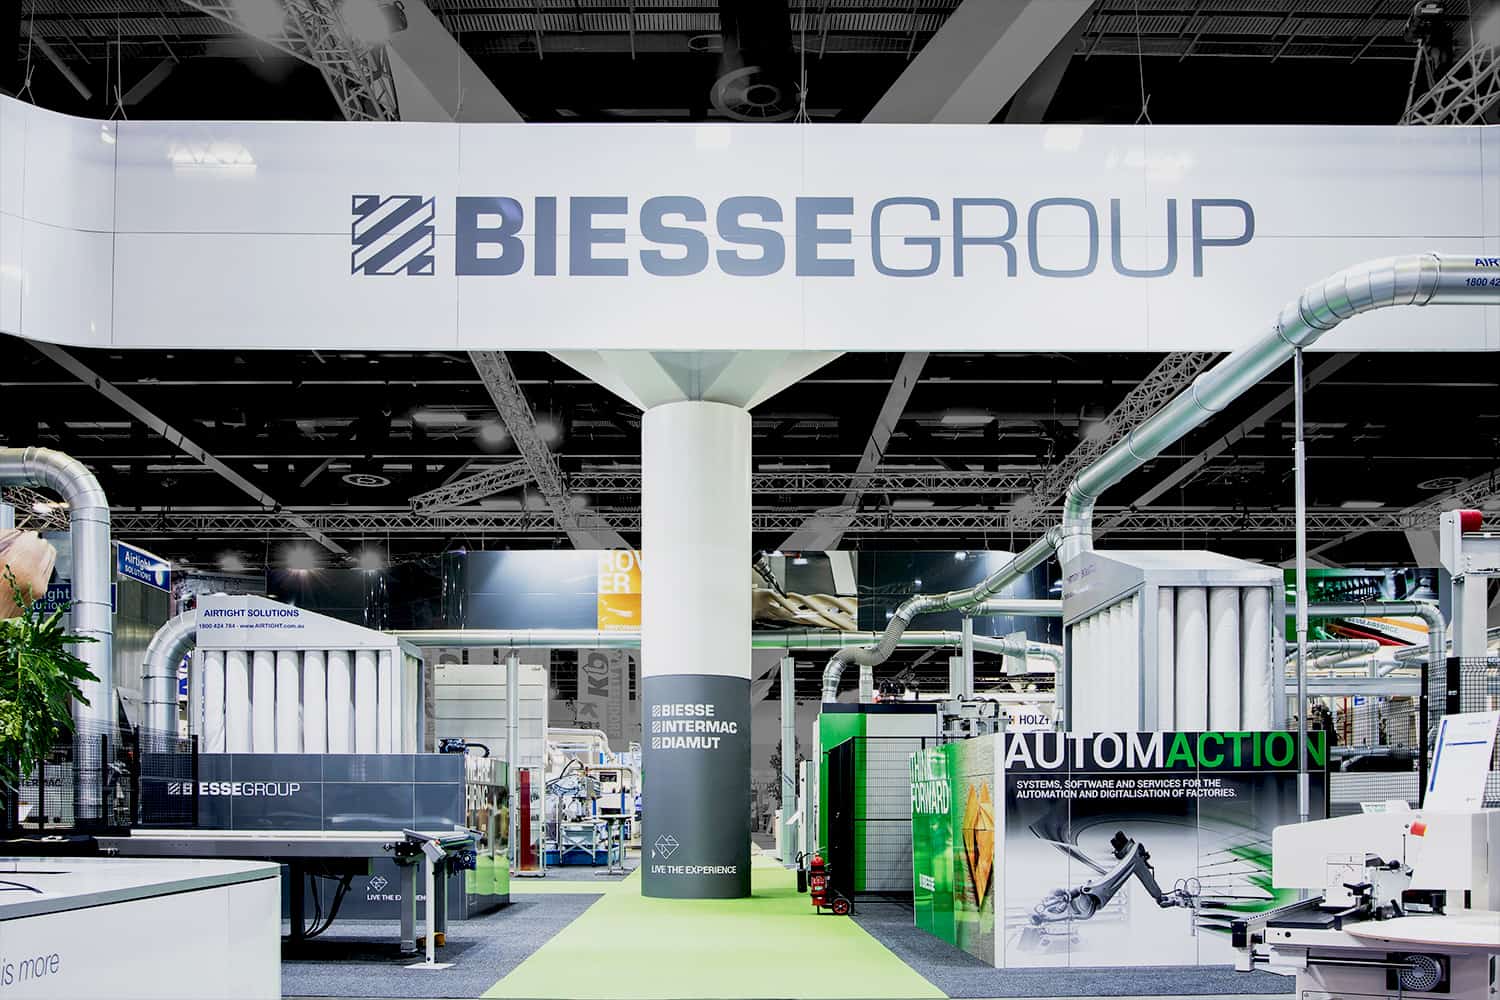 Biesse custom tradeshow stand at AWISA 2018 by Expocentric.com.au